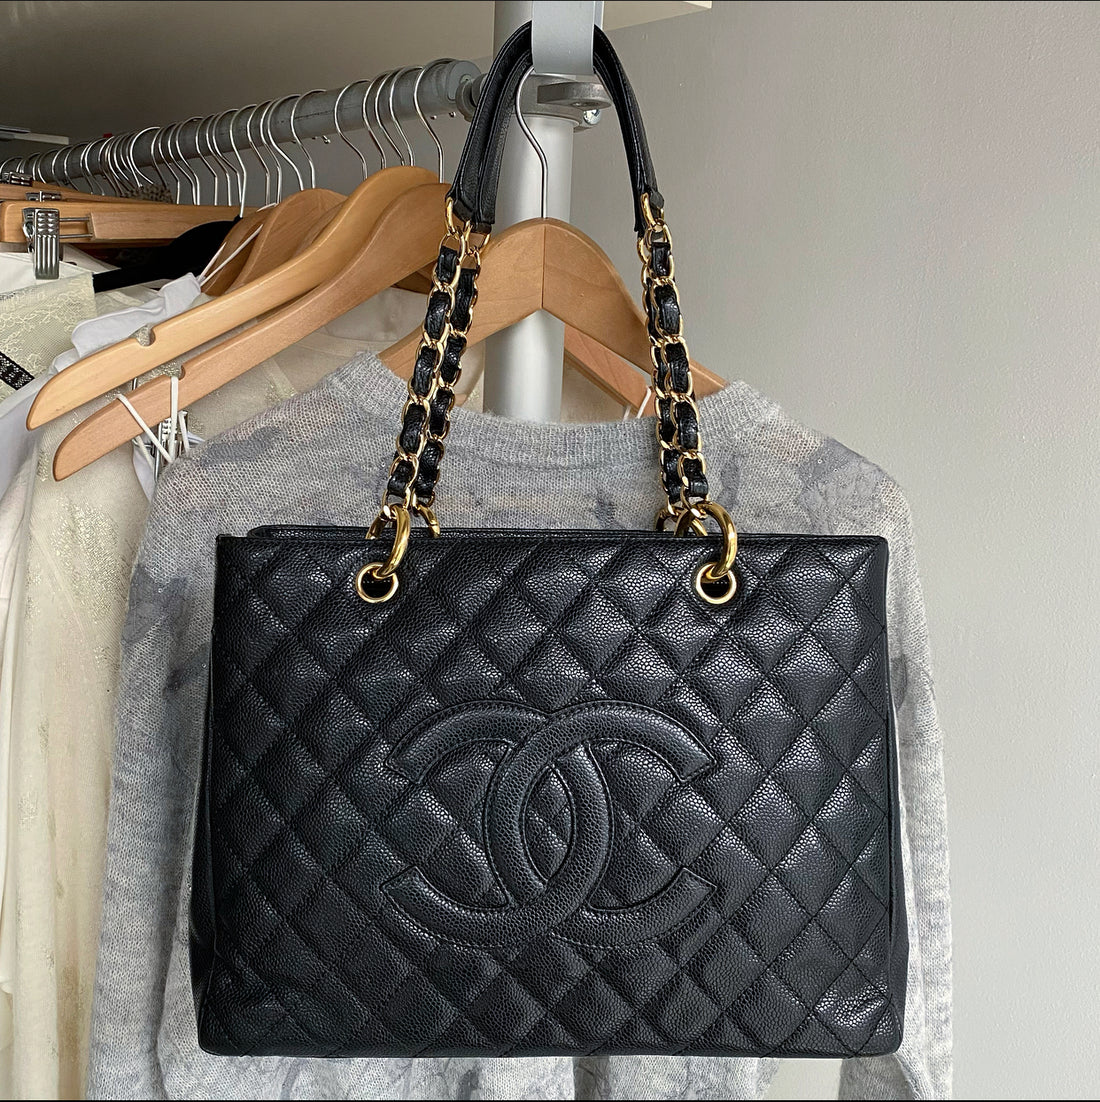 My Paris Time Square - Chanel GST Black Caviar Grand Shopping Tote Bag GHW  Product Code : B12047 Condition : 99% New, Used Once Only Size : 33L x 24 H  x